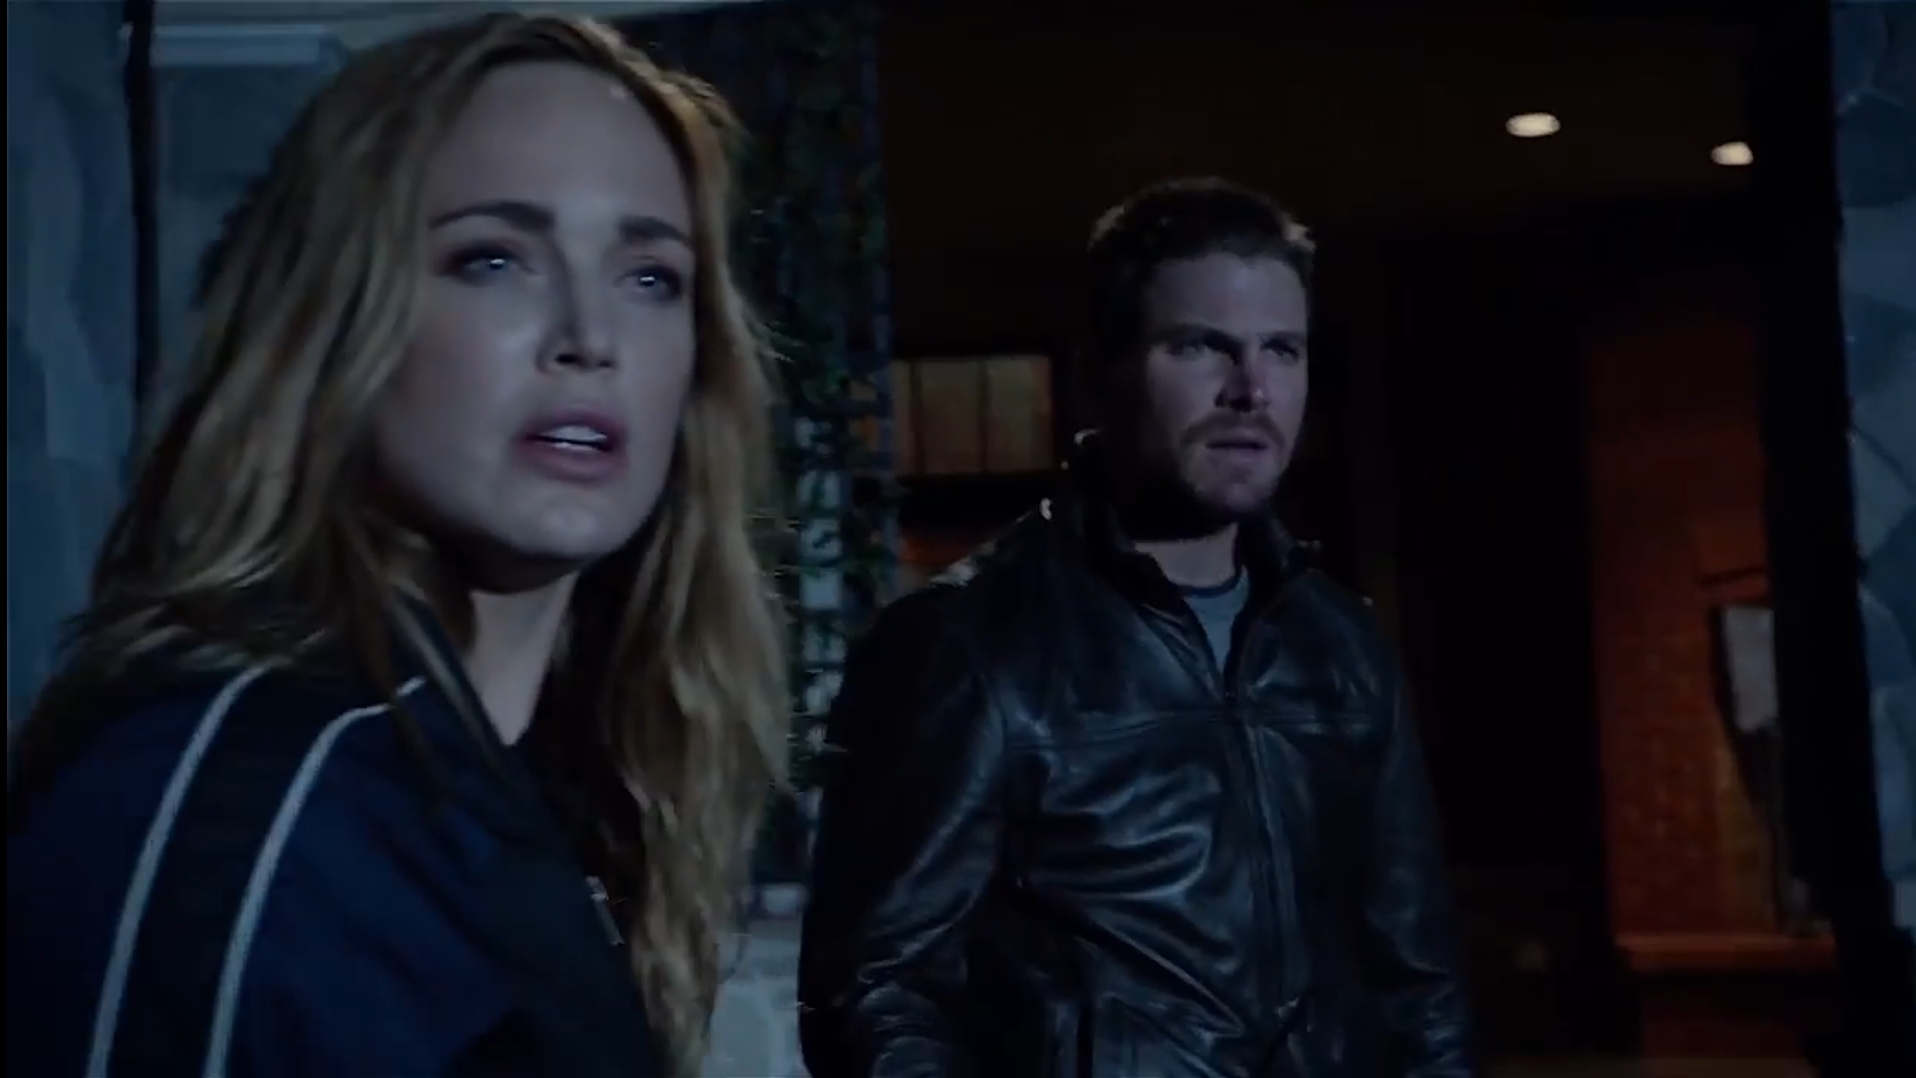 Sarah Lance and Oliver Queen with surprised expressions looking at someone off screen.